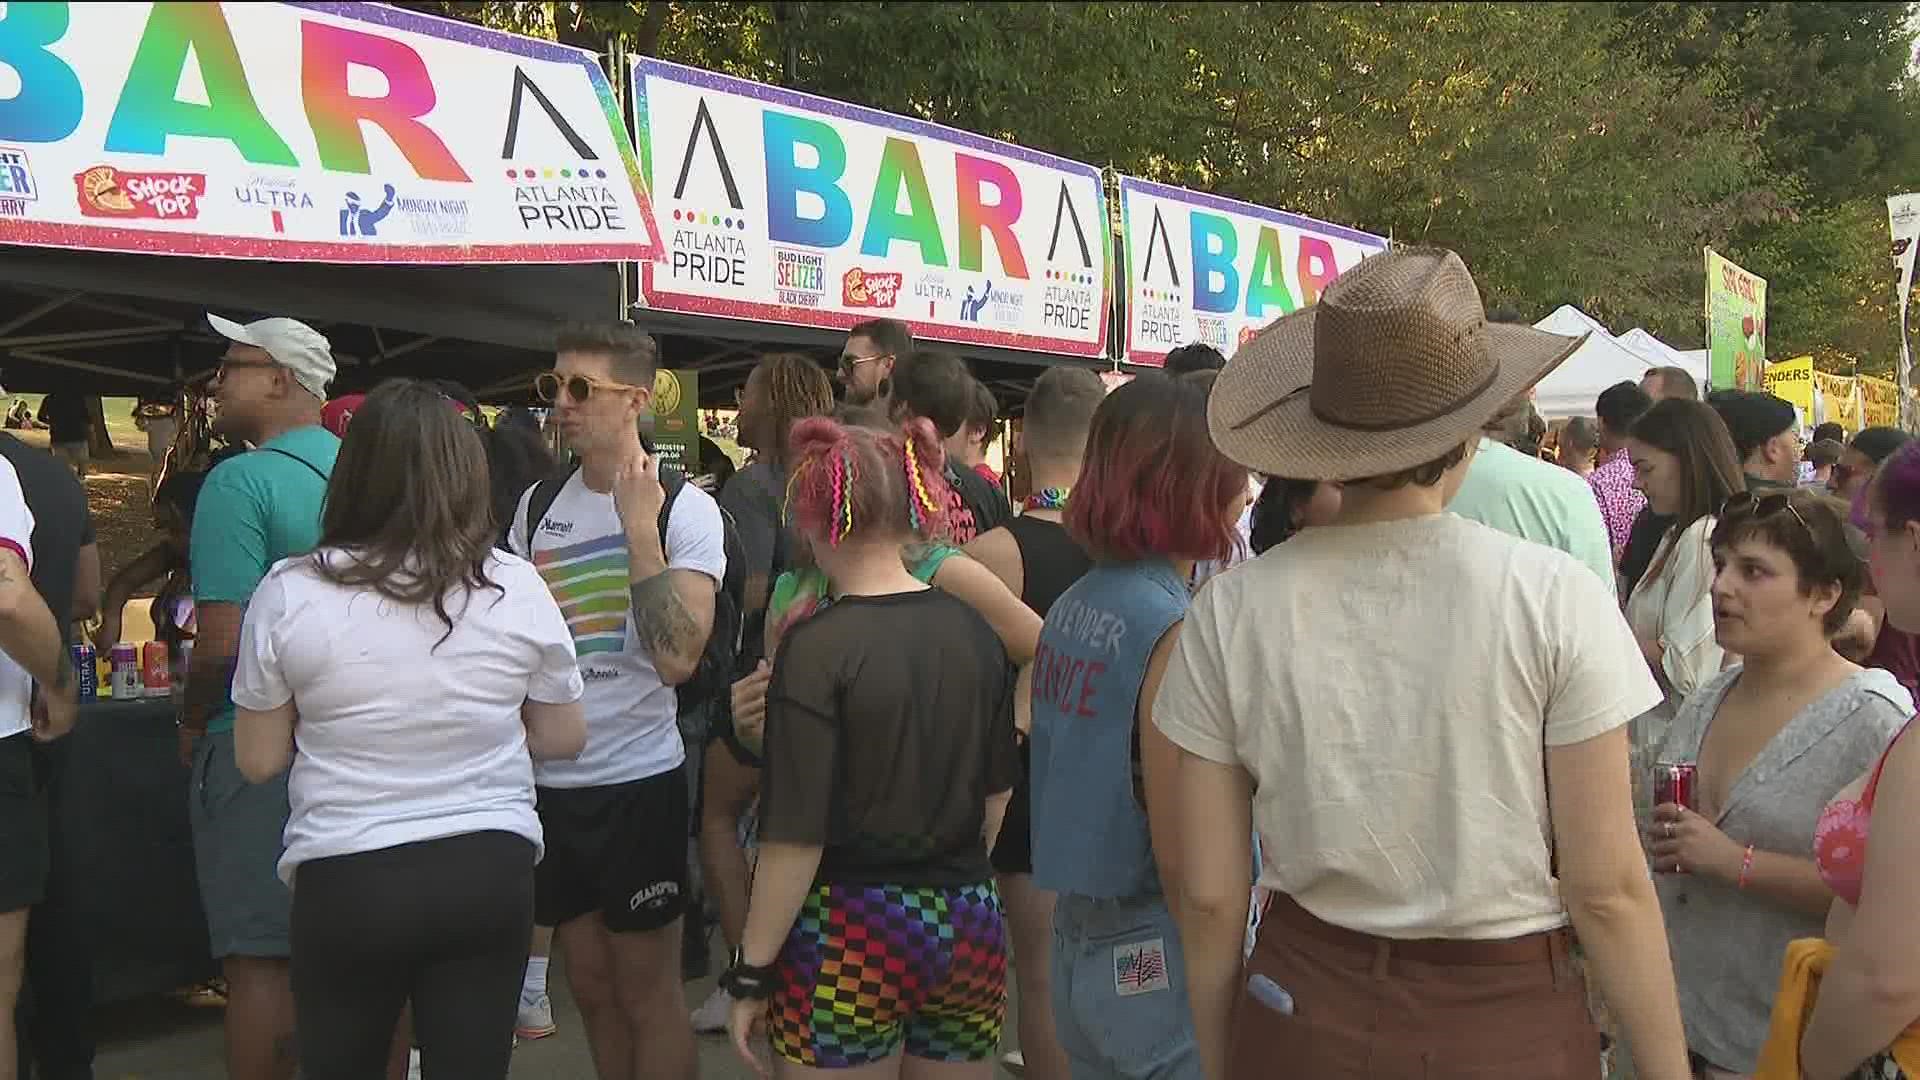 Around 350,000 people are expected to attend the festival and its almost 2 dozen events, including Atlanta's Pride Parade on Sunday.